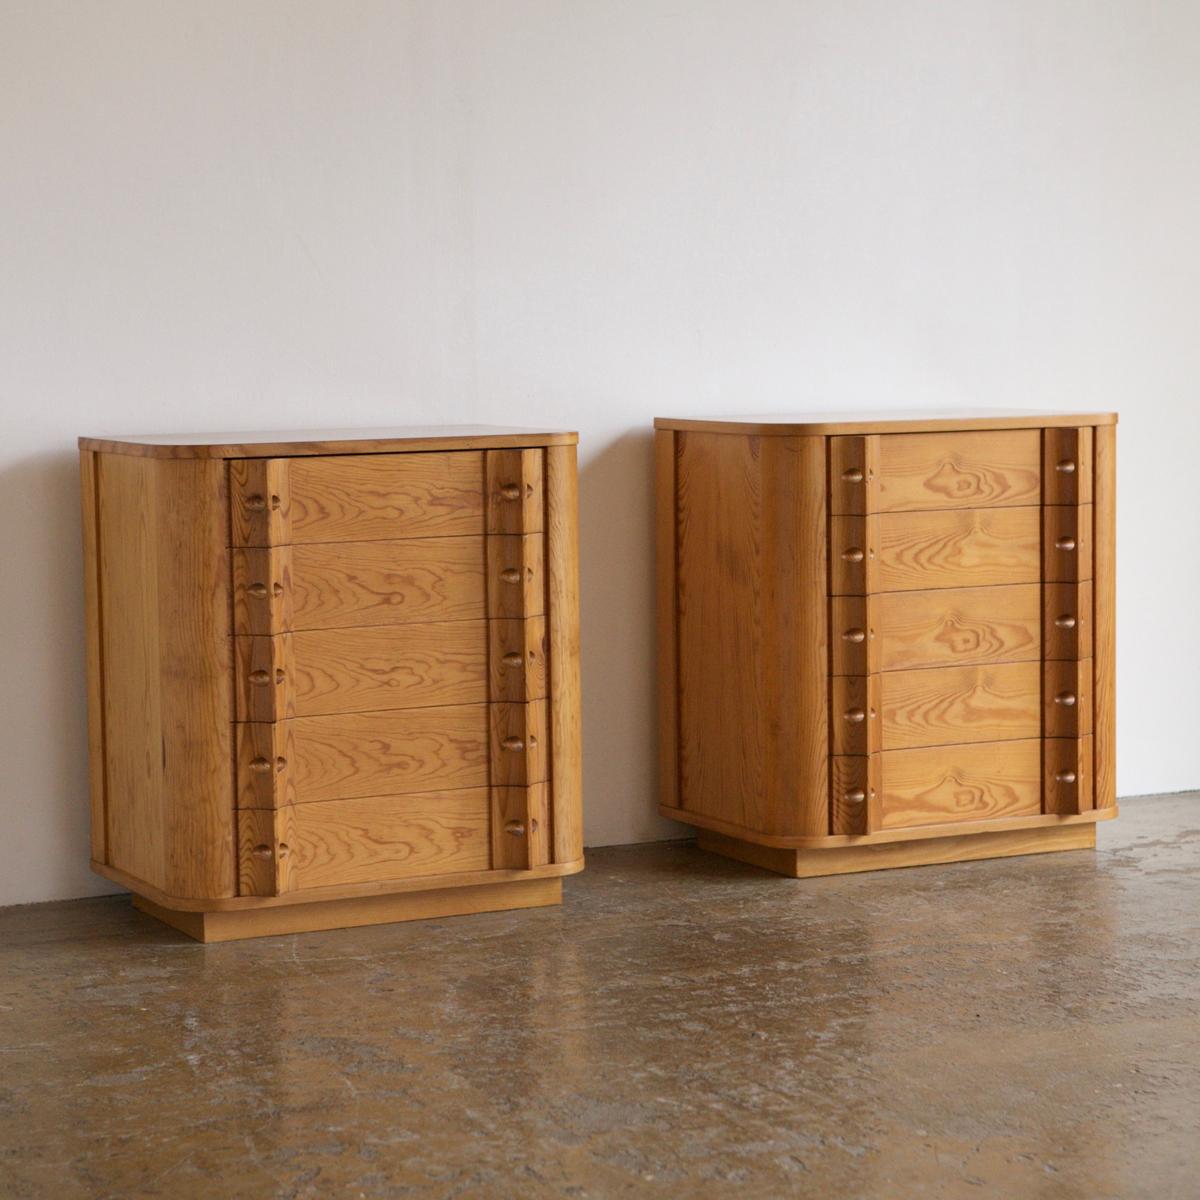 A truly beautiful pair of chests by Spanish designer Jordi Vilanova i Bosch dated 1960's. The pair are made from pine and the designer has made a feature of the grain across each of the 5 drawers. The handles have a sculpted feel with an integral